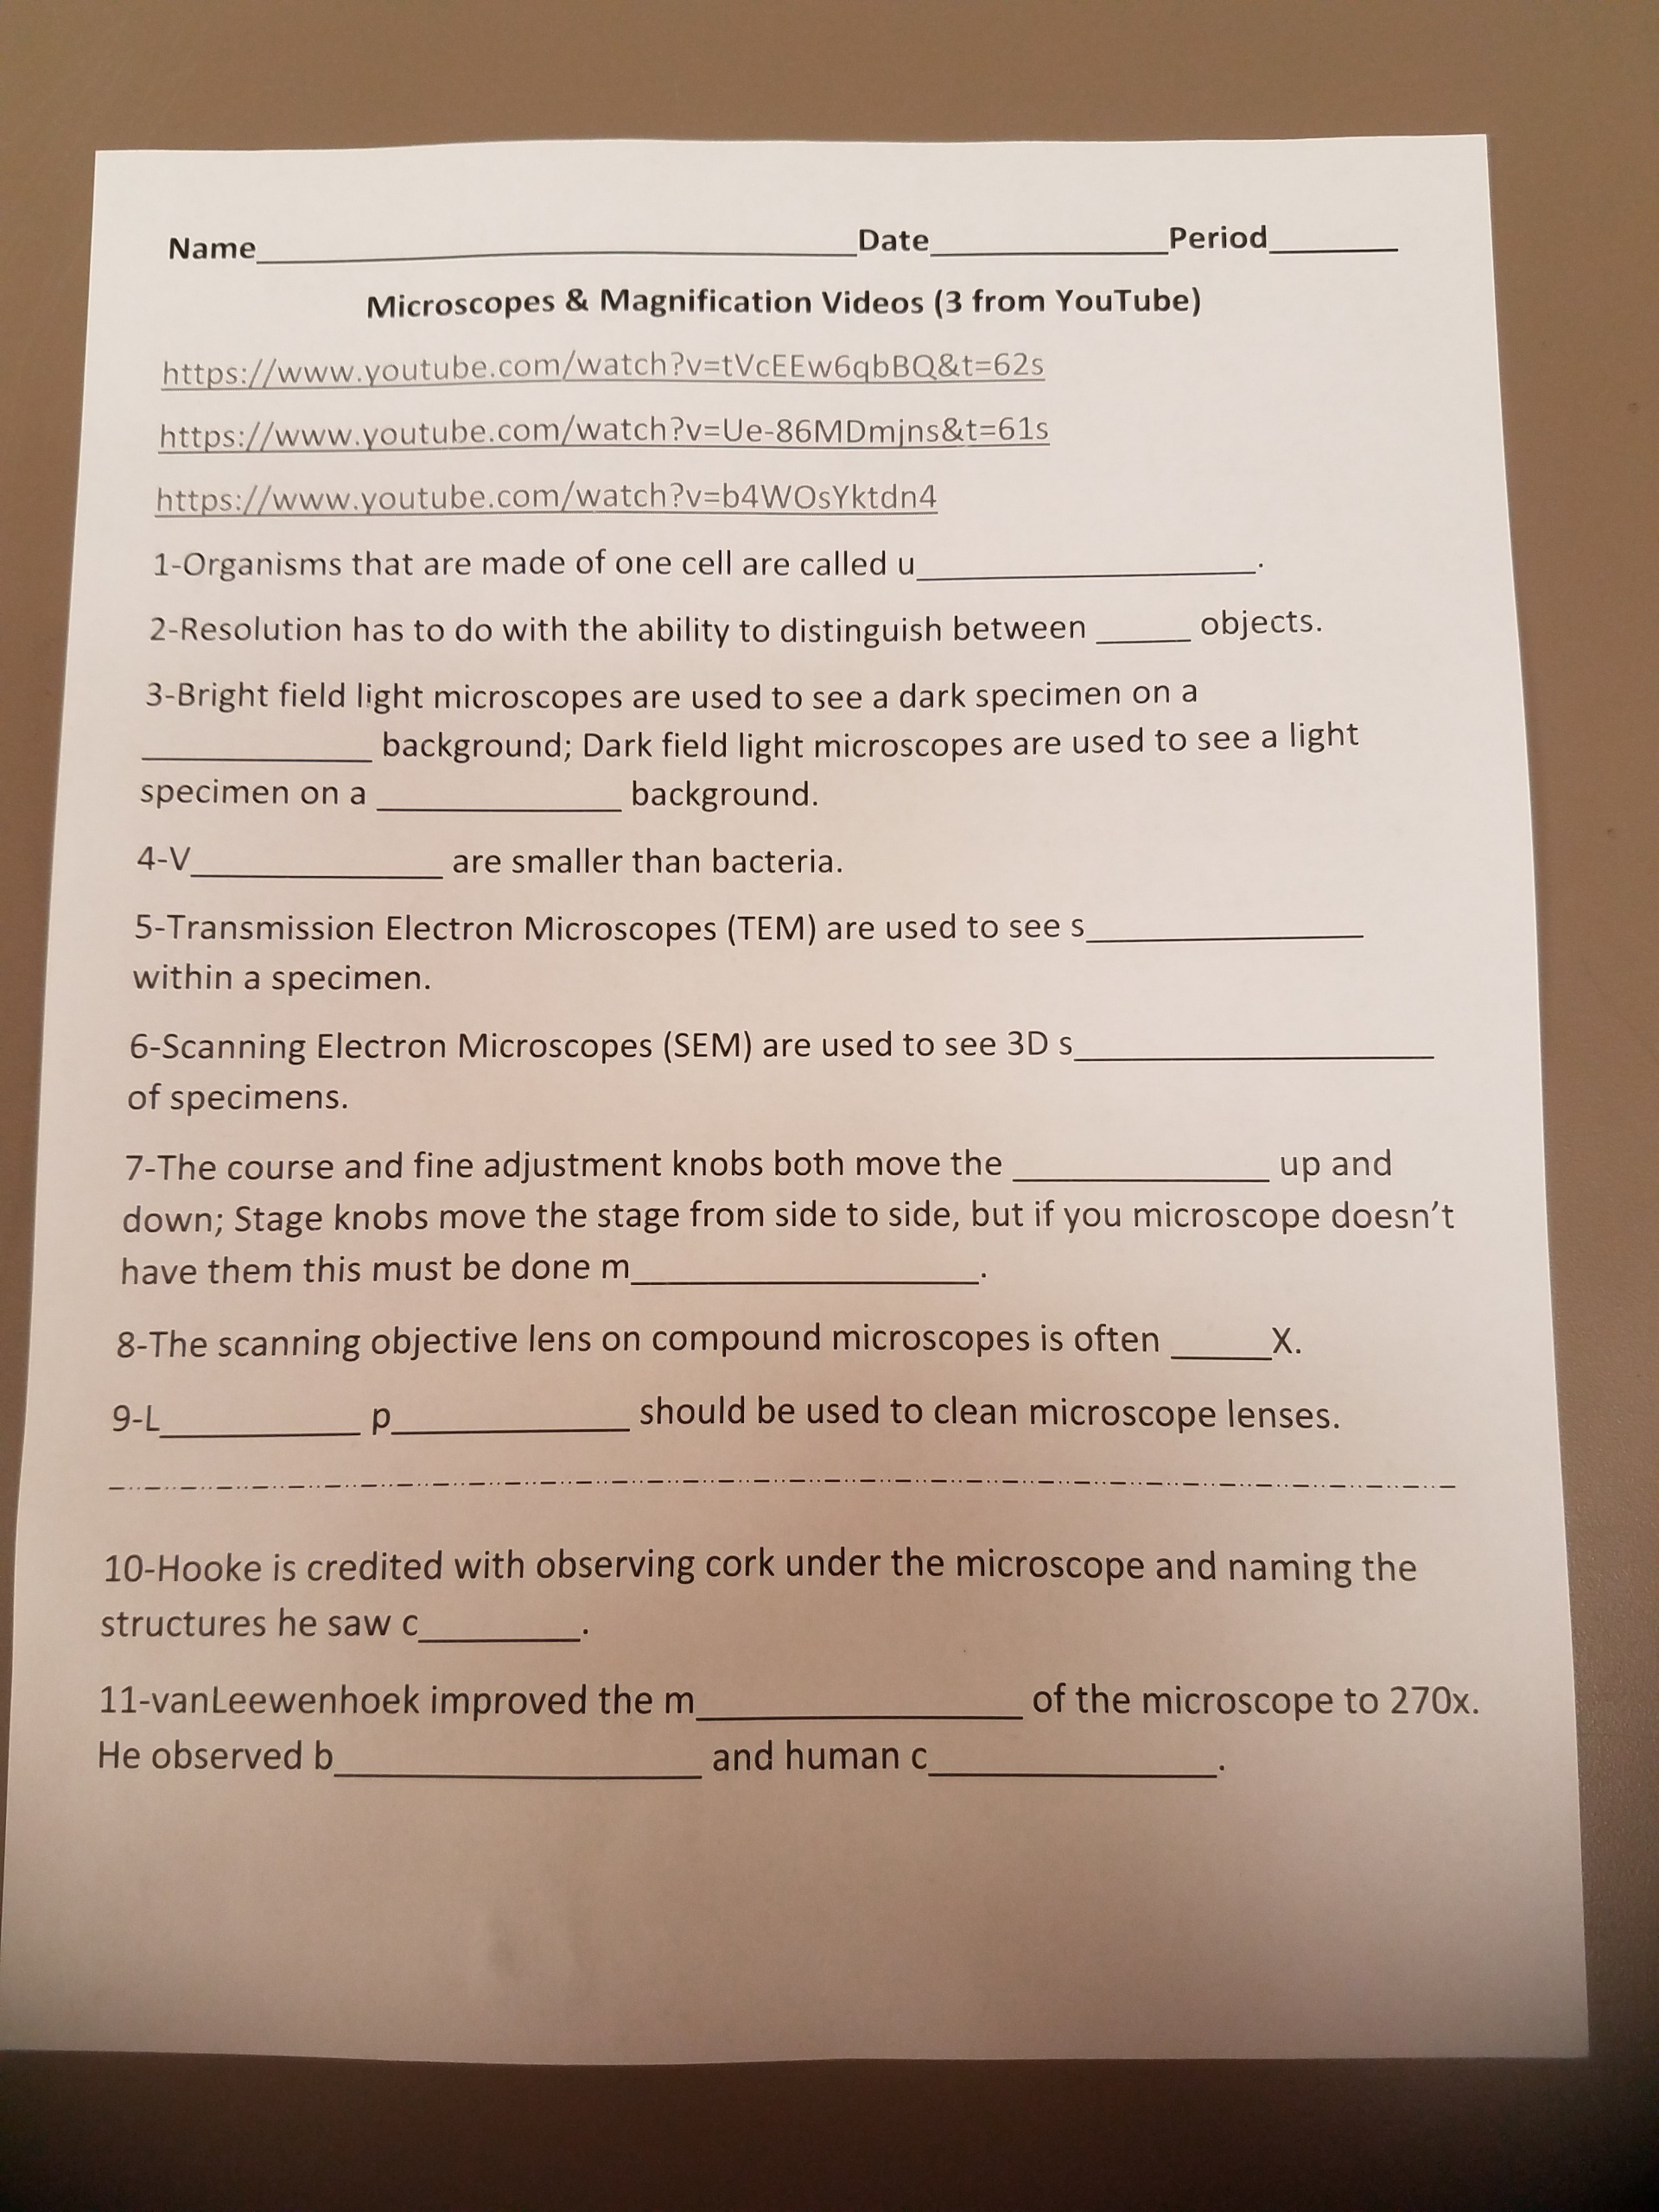 microscope-magnification-worksheet